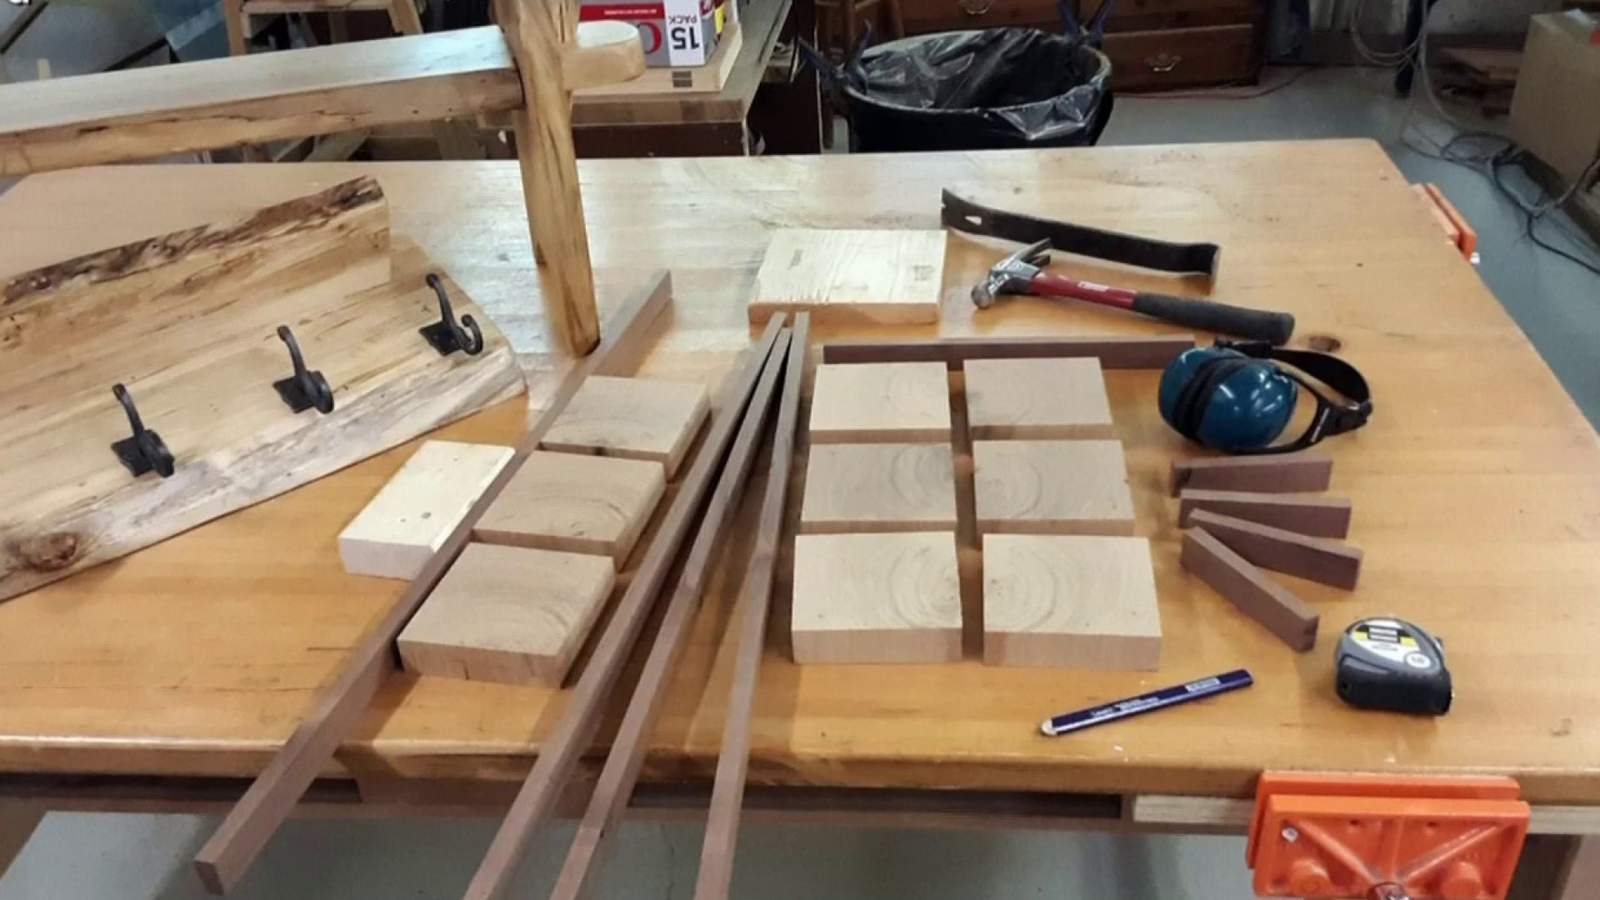 Local wood mill helping others create their own business